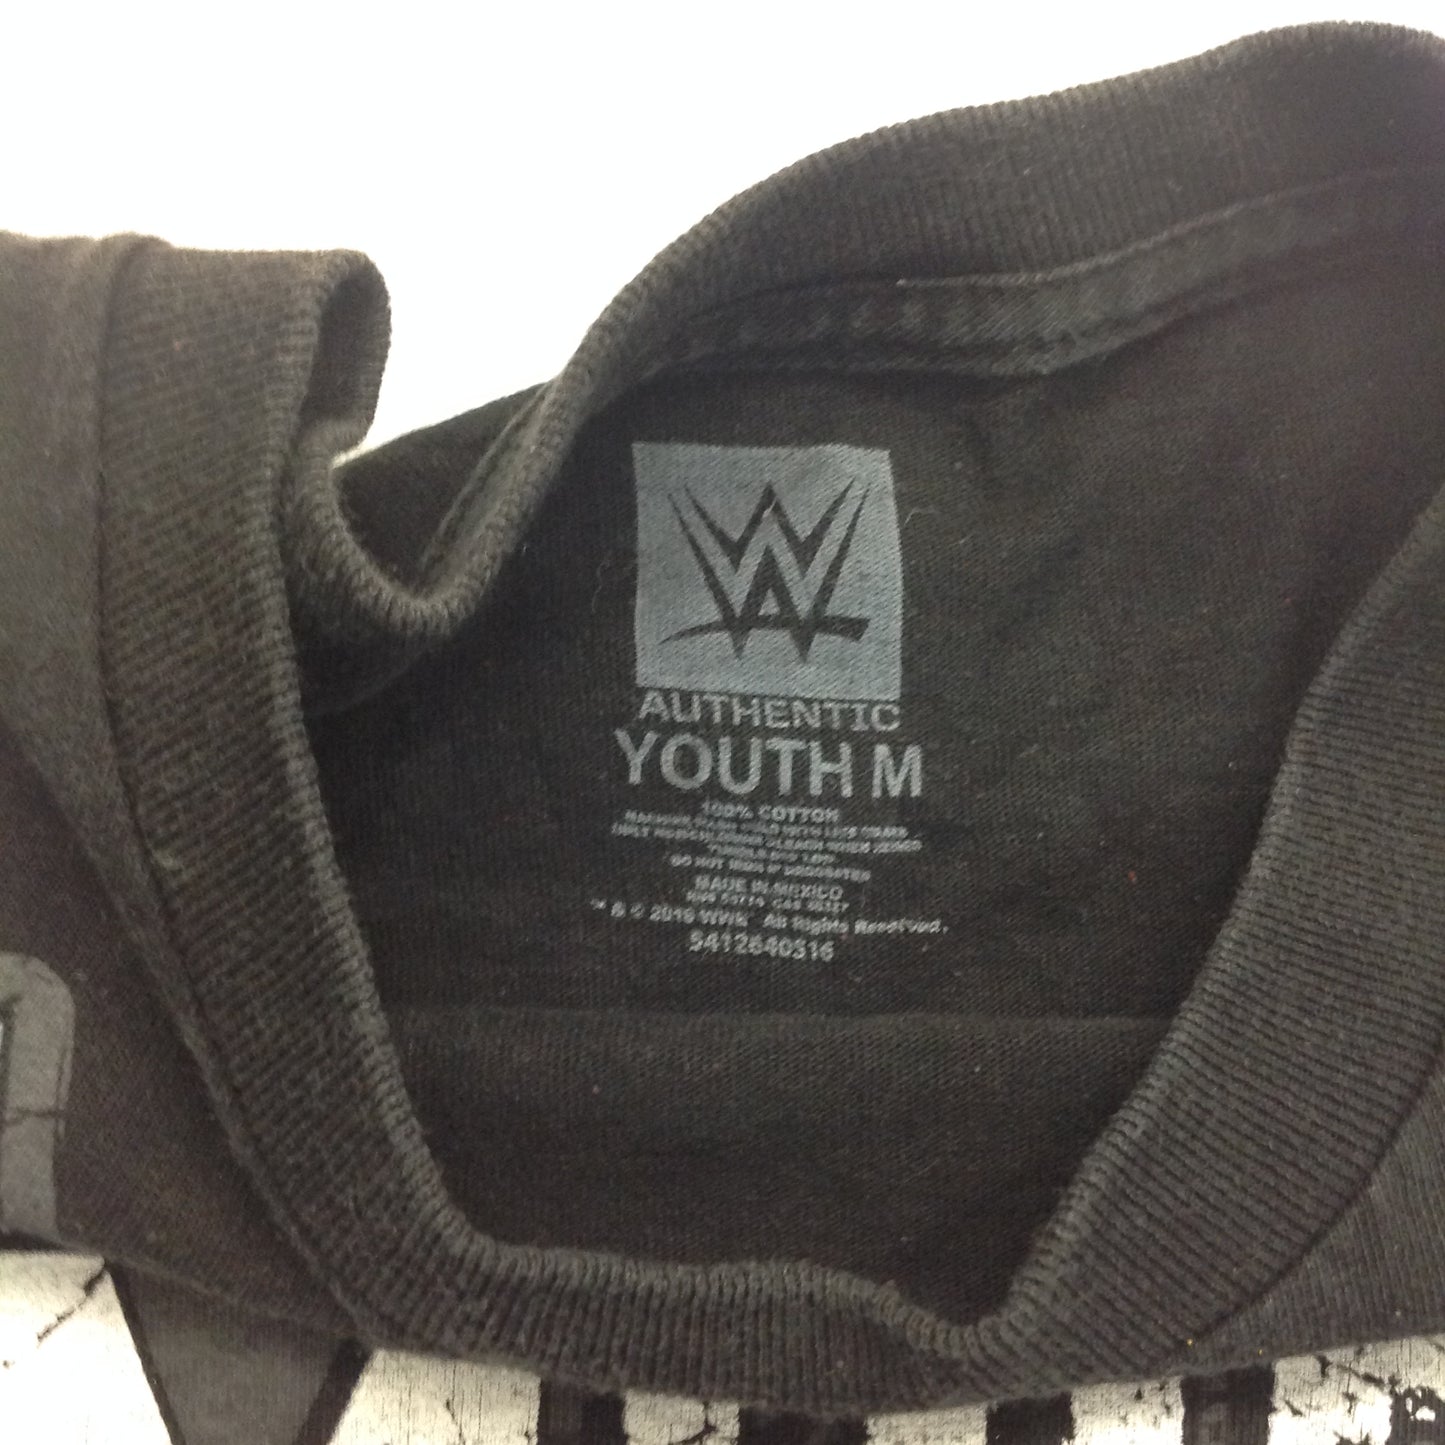 2018 WWE WWF Authentic Youth Medium Black T-Shirt Roman Empire Spare No One Spear Everyone Believe That